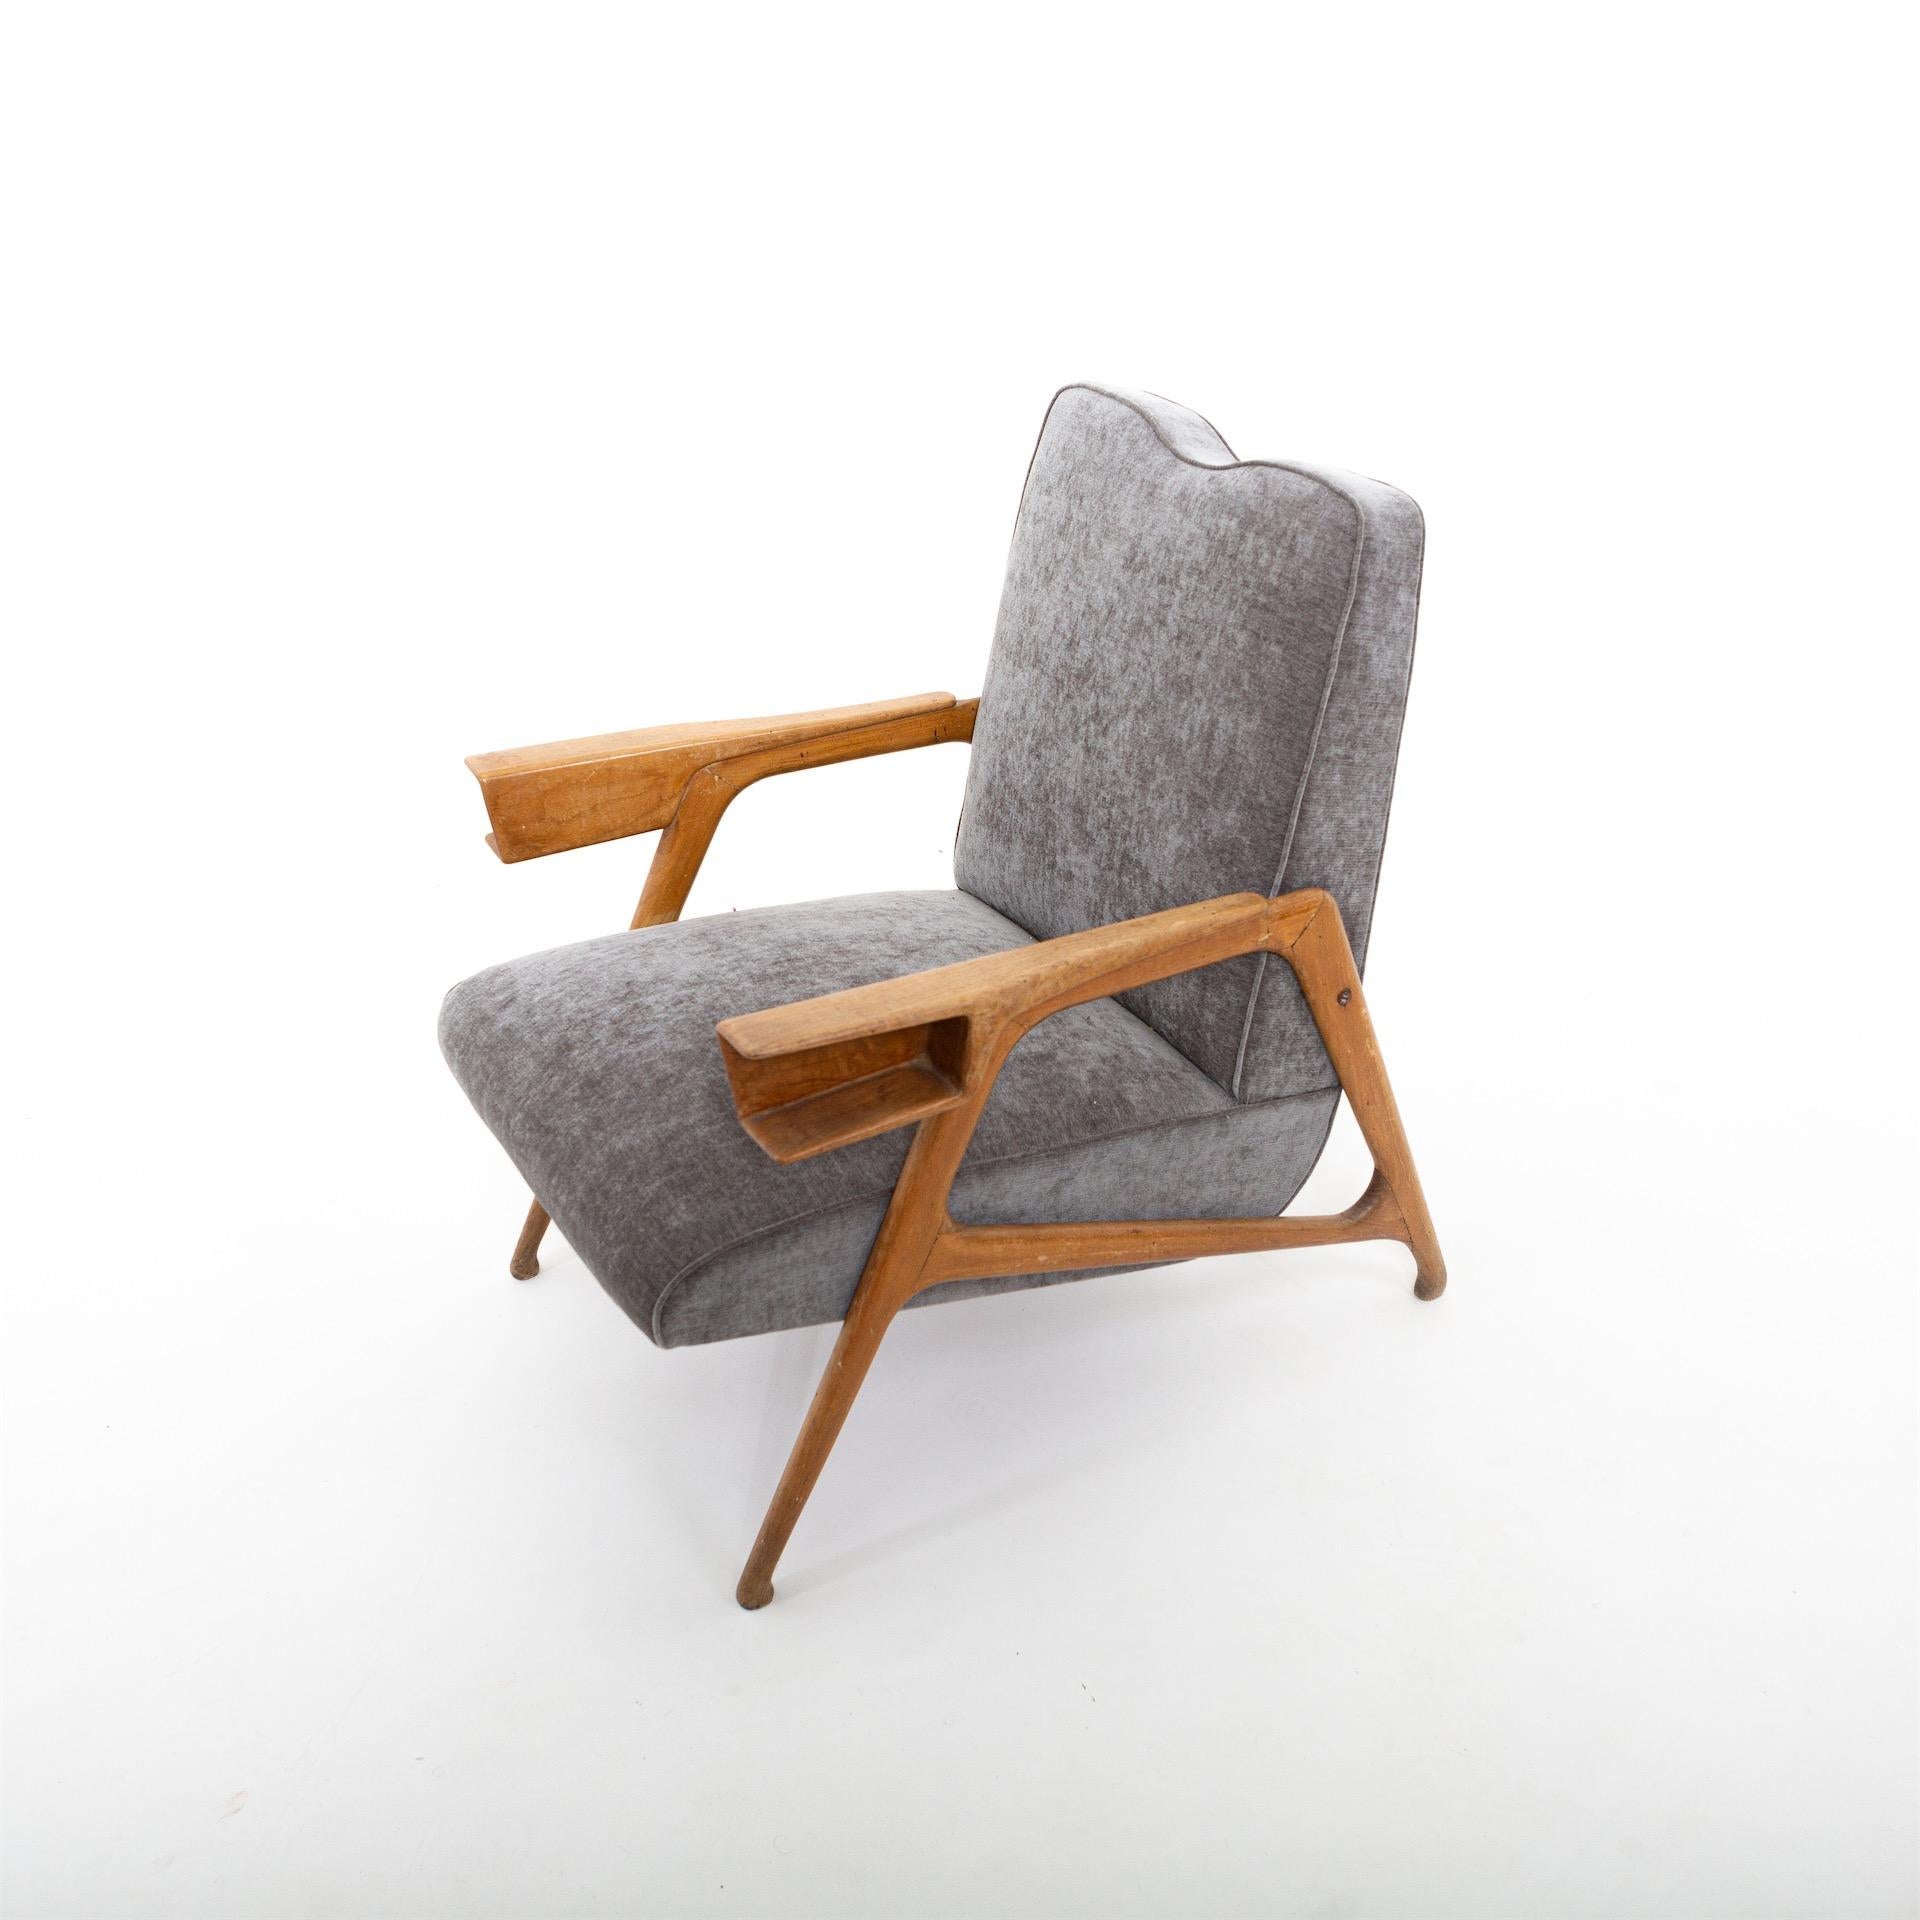 Armchair by Augusto Romano with wooden armrests and a grey velvet fabric cover.